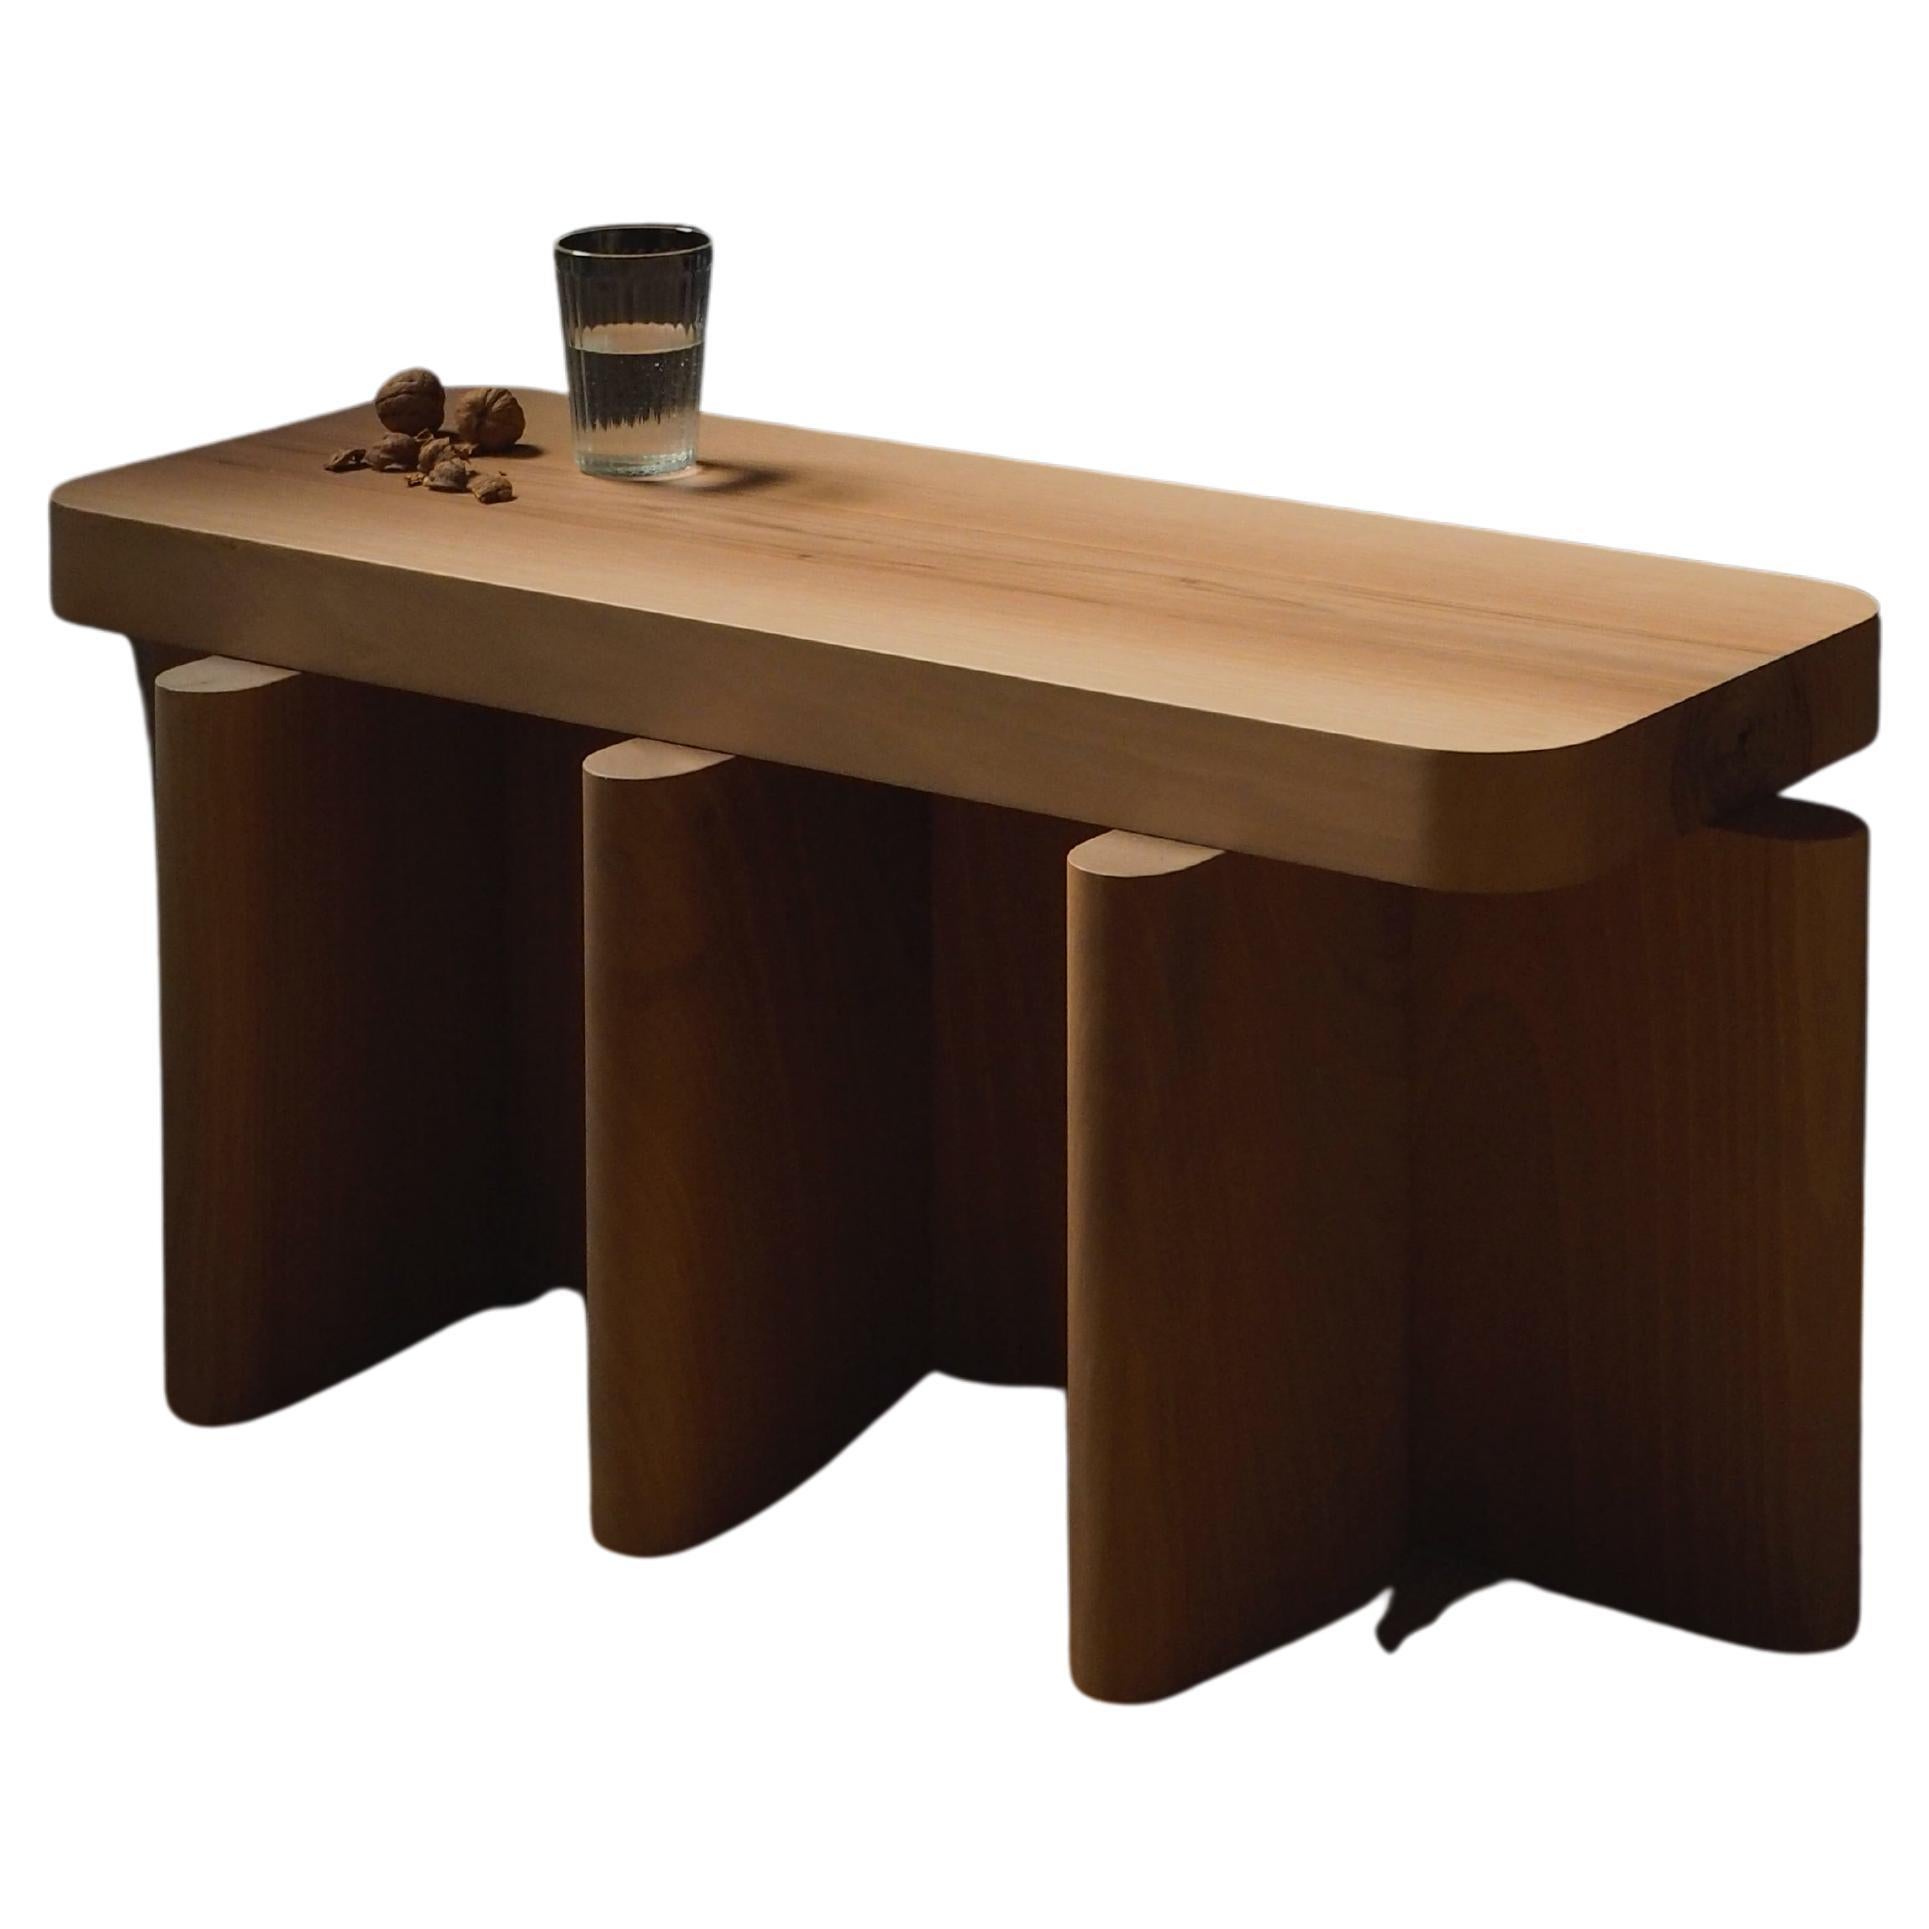 Contemporary B3.1 Coffee Table in Natural Nutwood